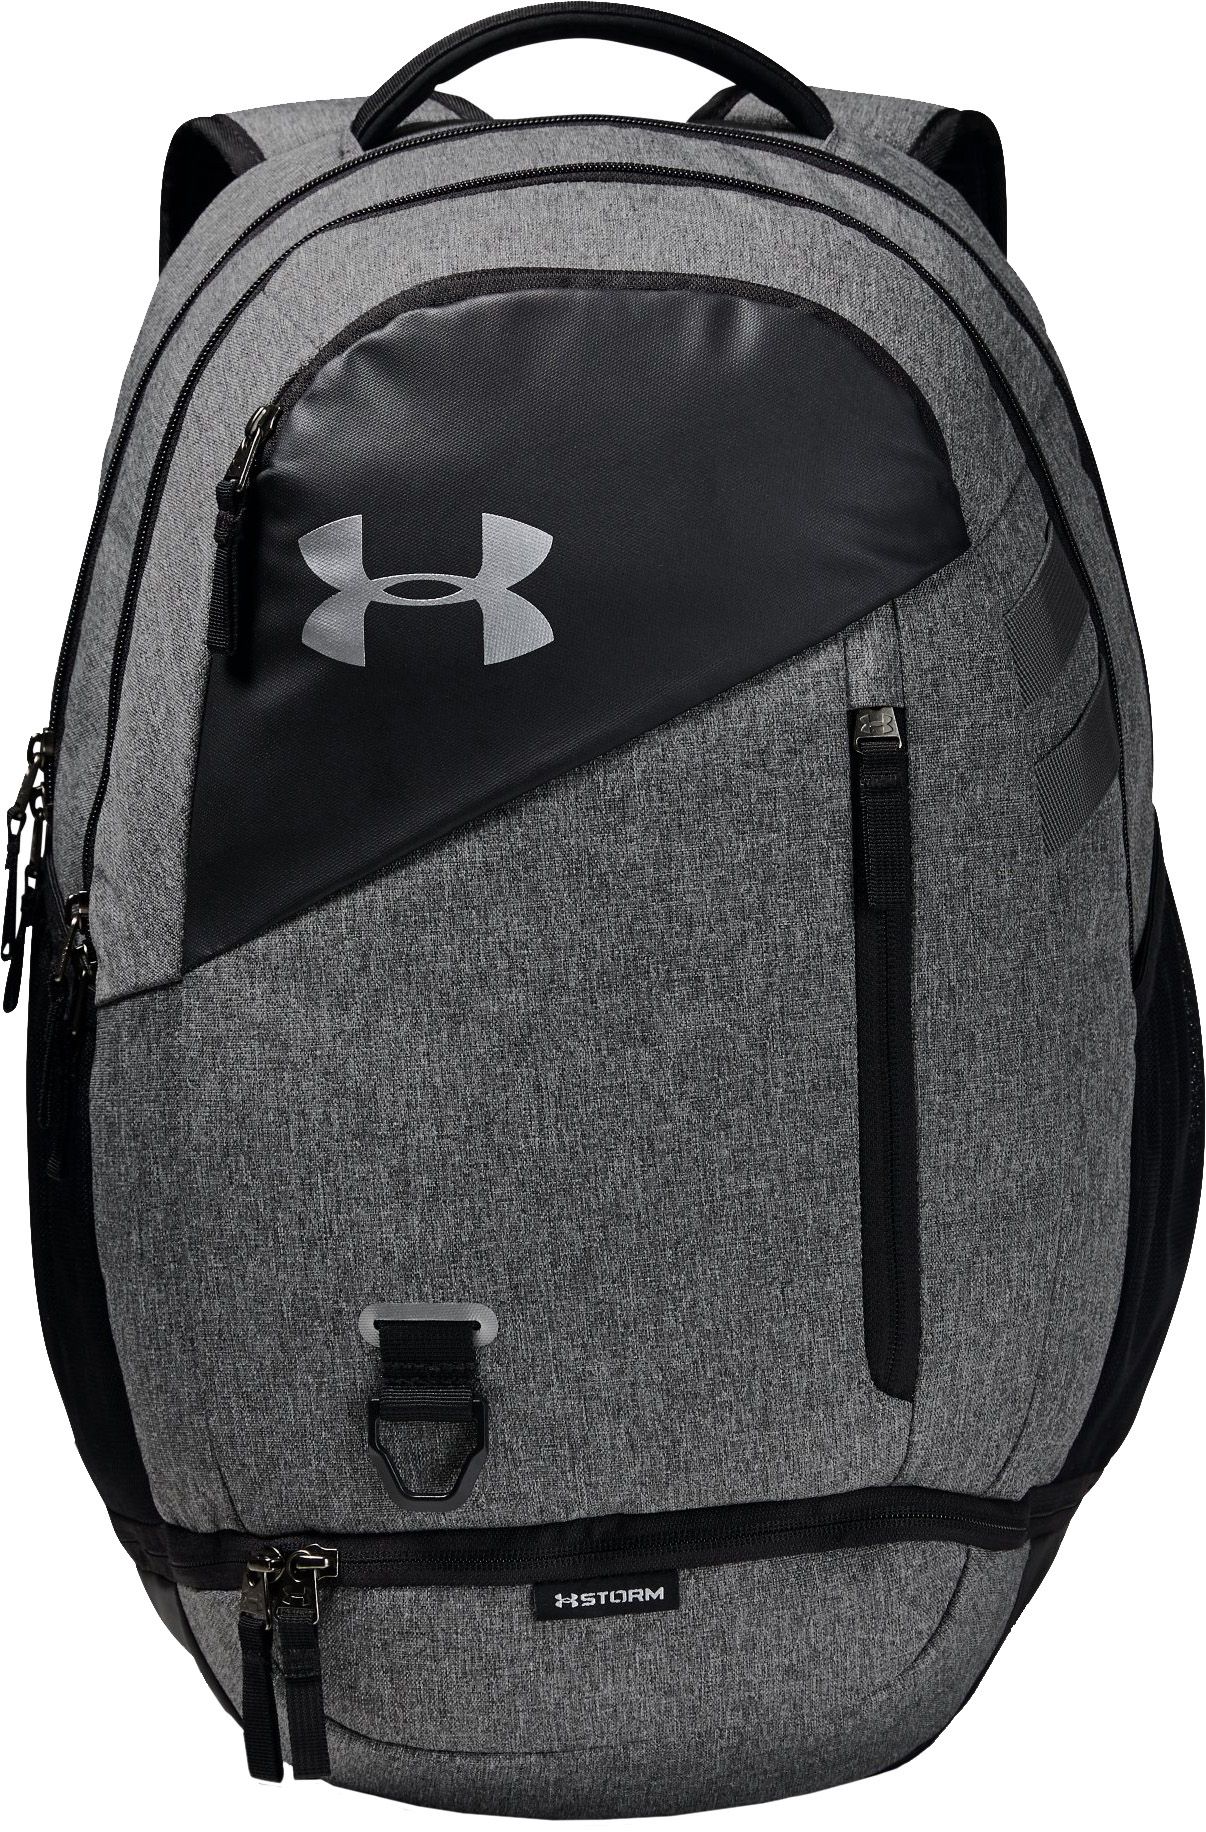 Under Armour Hustle 4.0 Backpack | DICK 